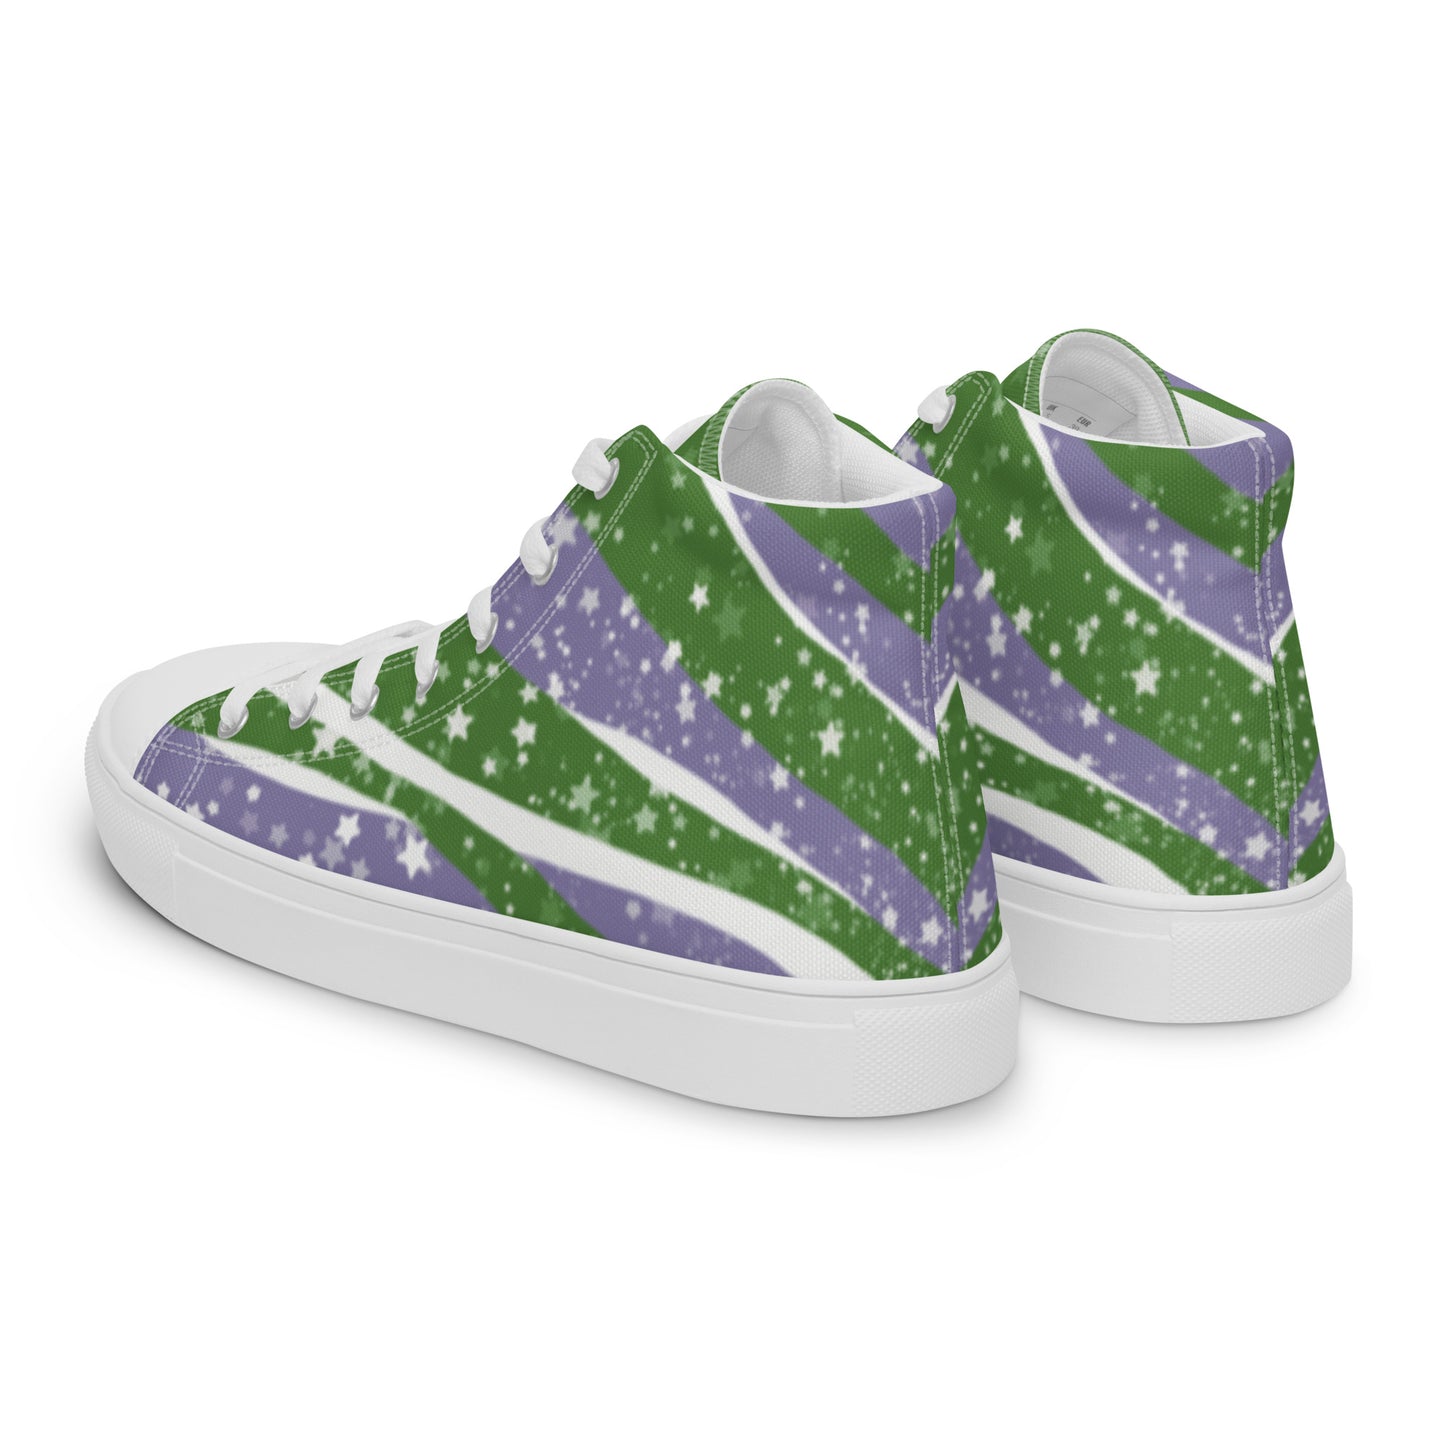 Left back view: a pair of high top shoes with green, purple, and white ribbons that get larger from heel to laces, white stars, and the Aras Sivad logo on the tongue.